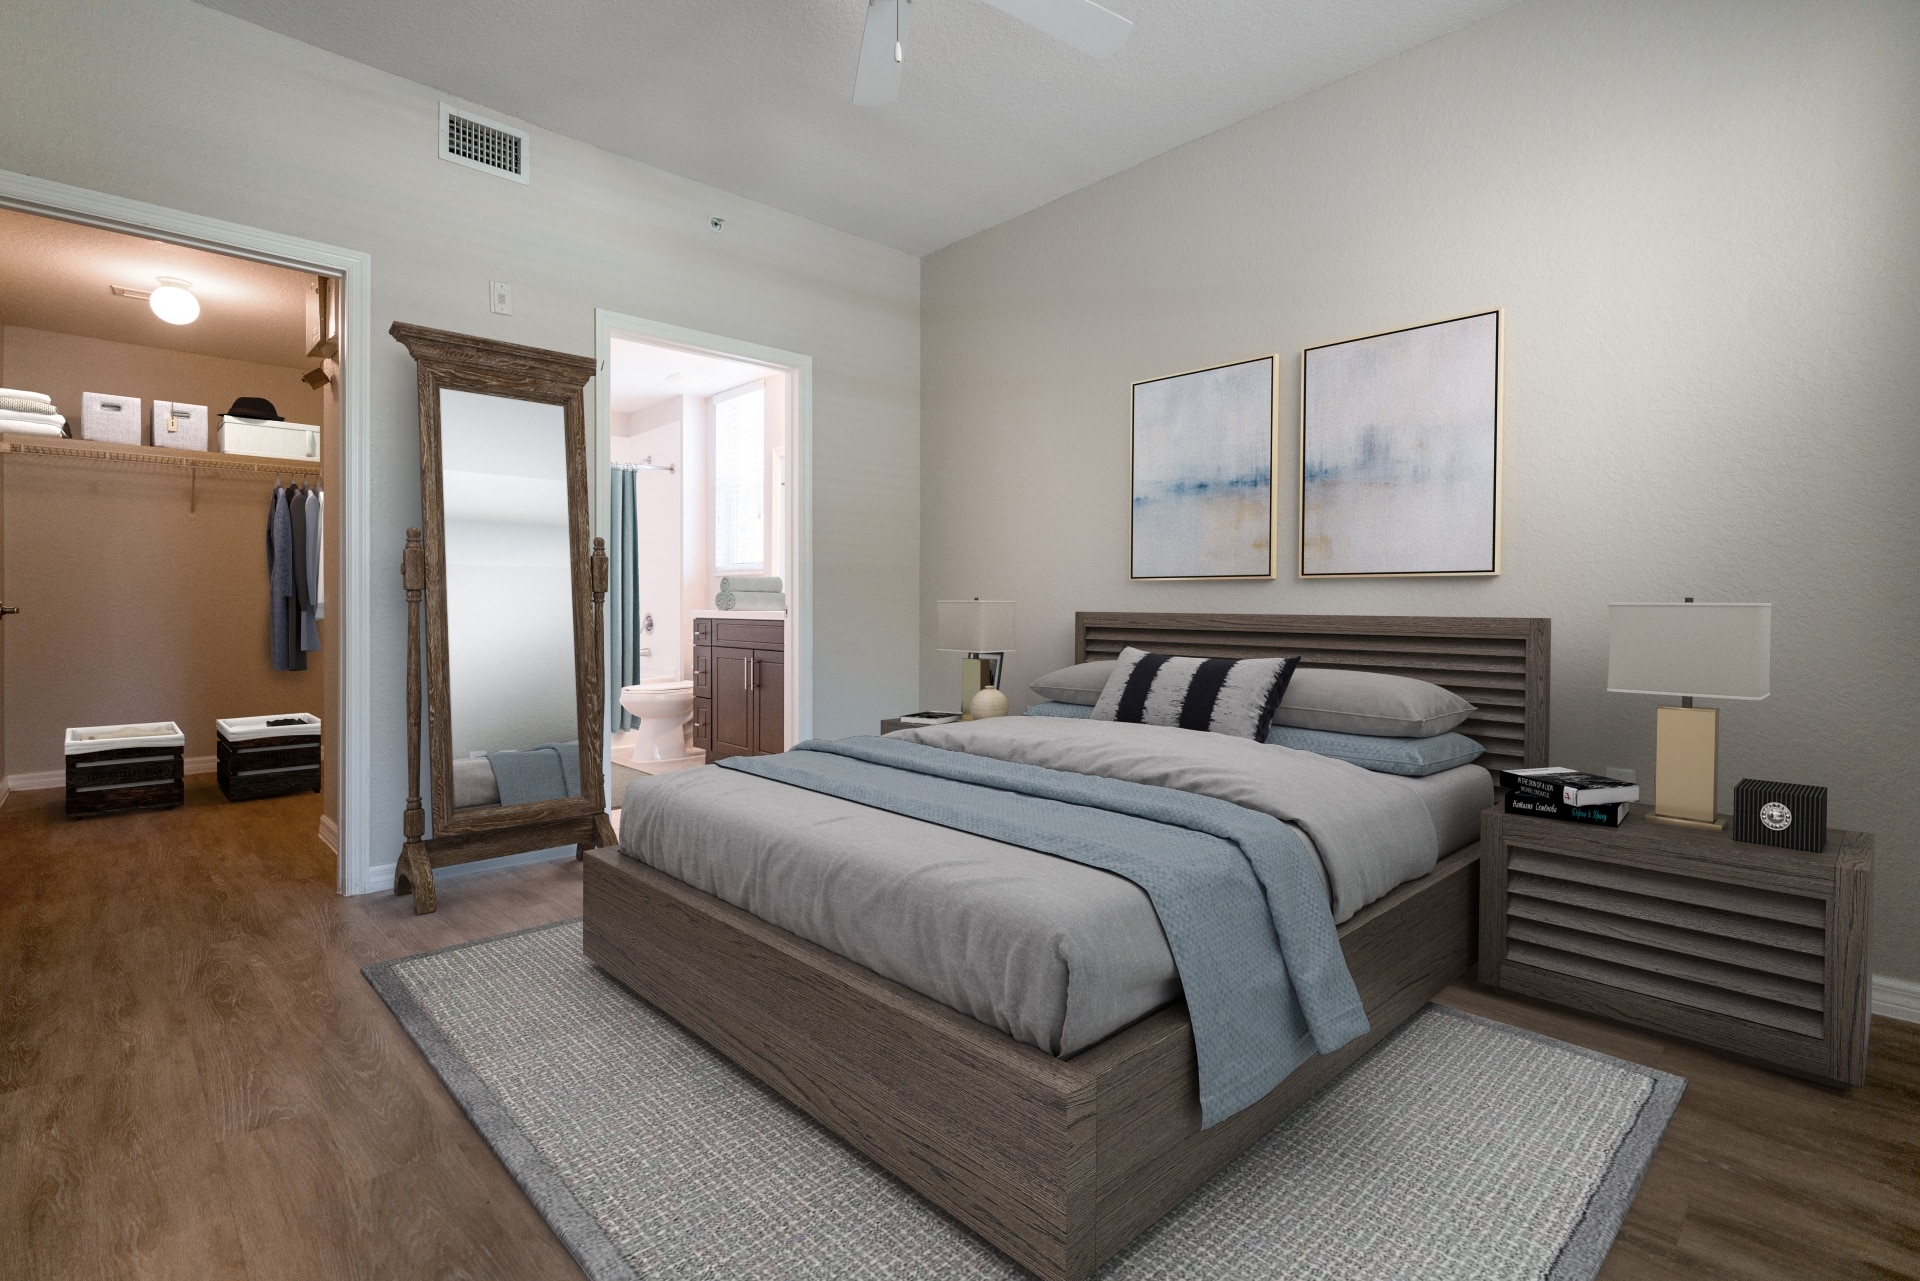 Virtual rendering of bedroom with queen sized bed and nightstand.